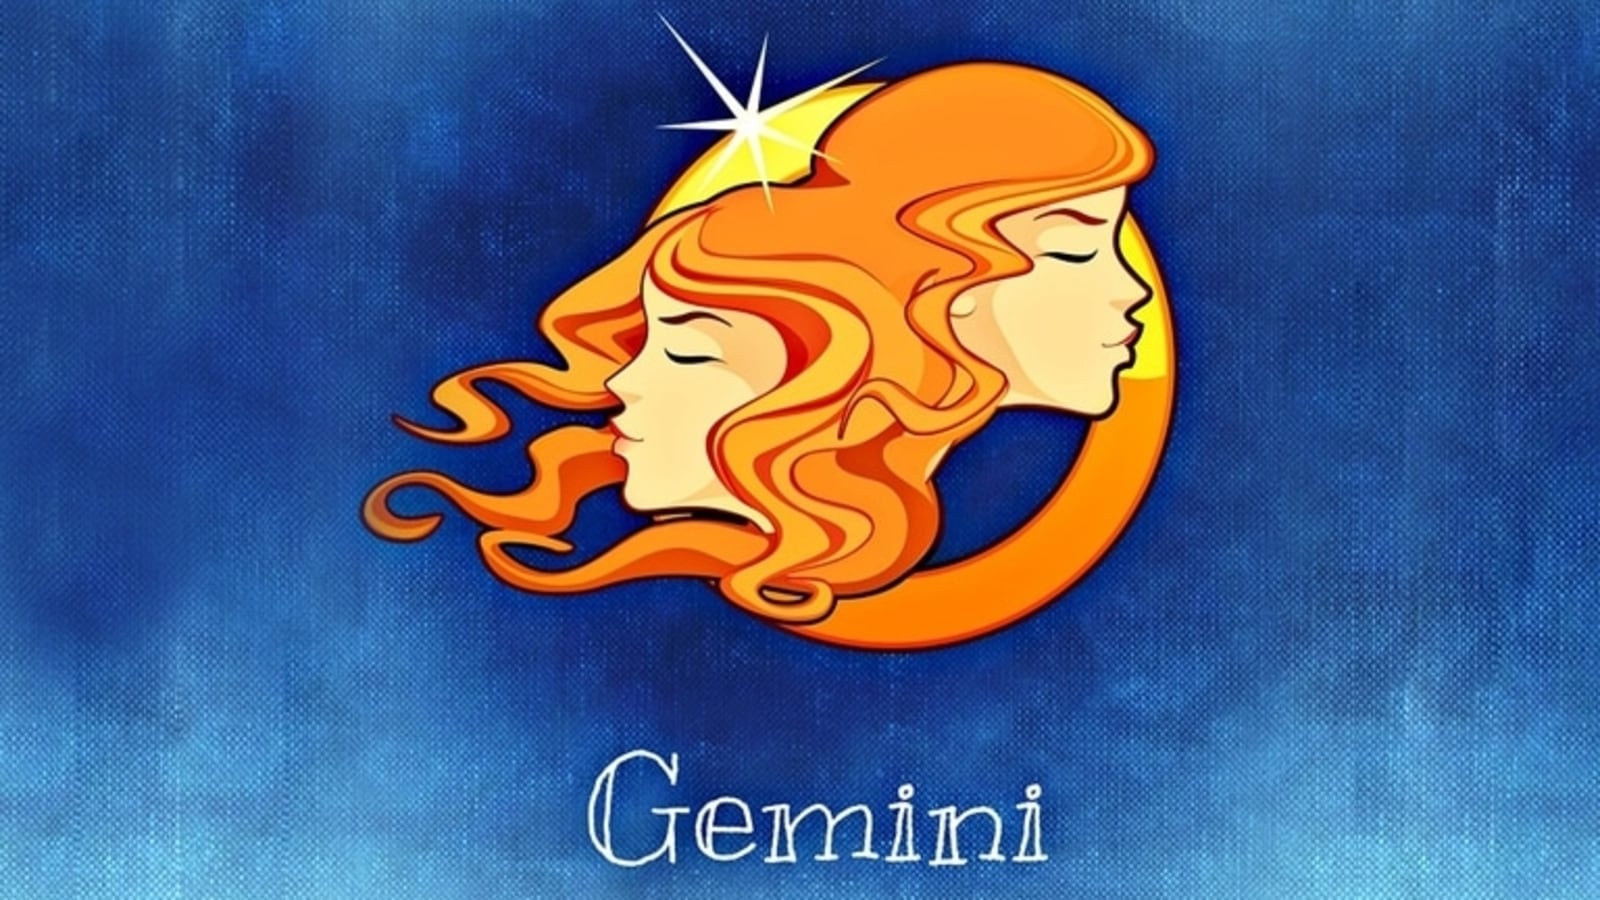 Gemini Daily Horoscope for Sept 6 Keep an eye on your financial life